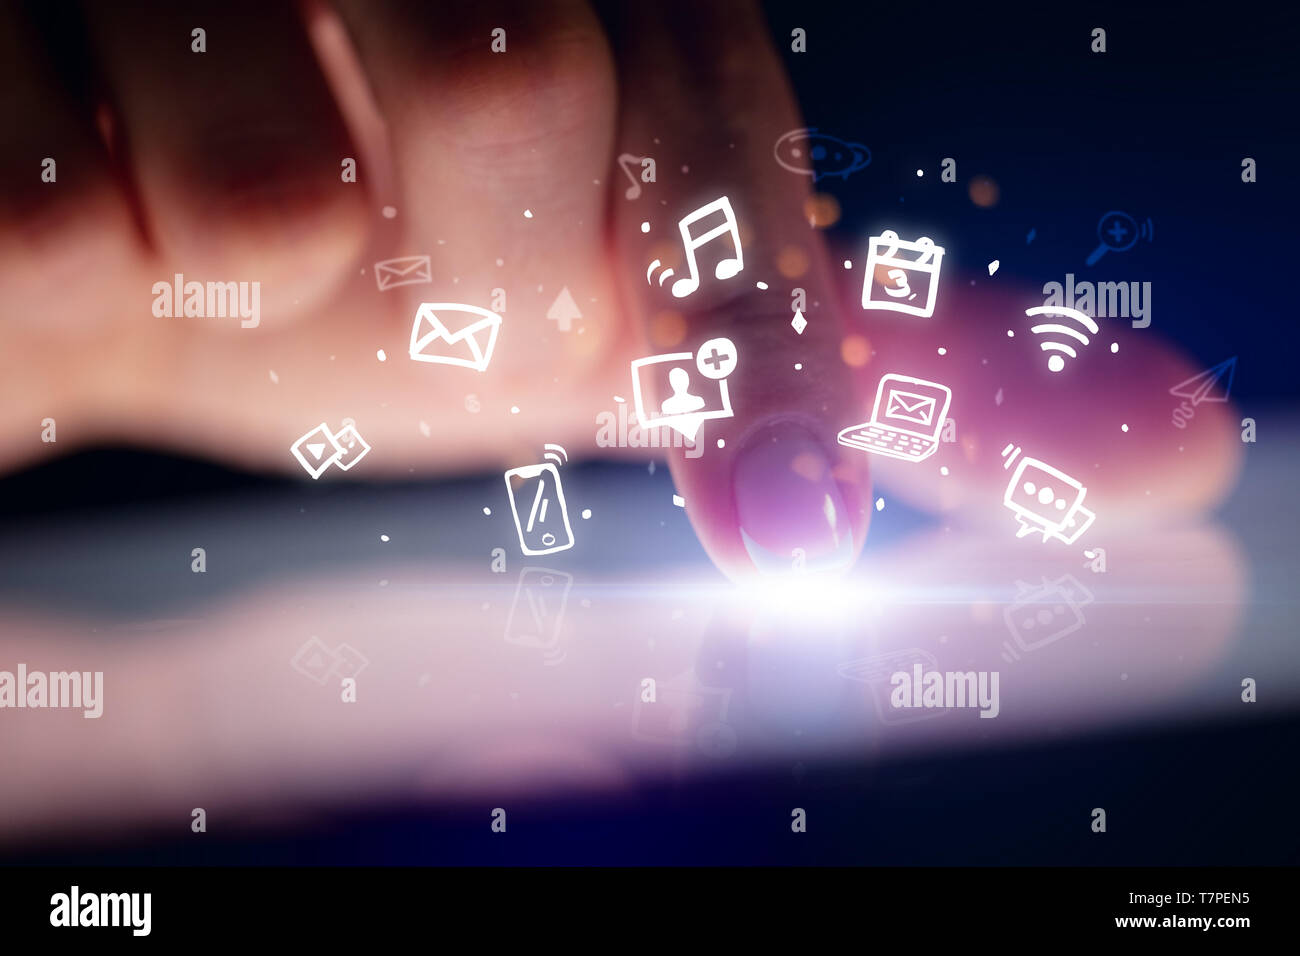 Finger touching tablet with hologram application icons and dark background  Stock Photo